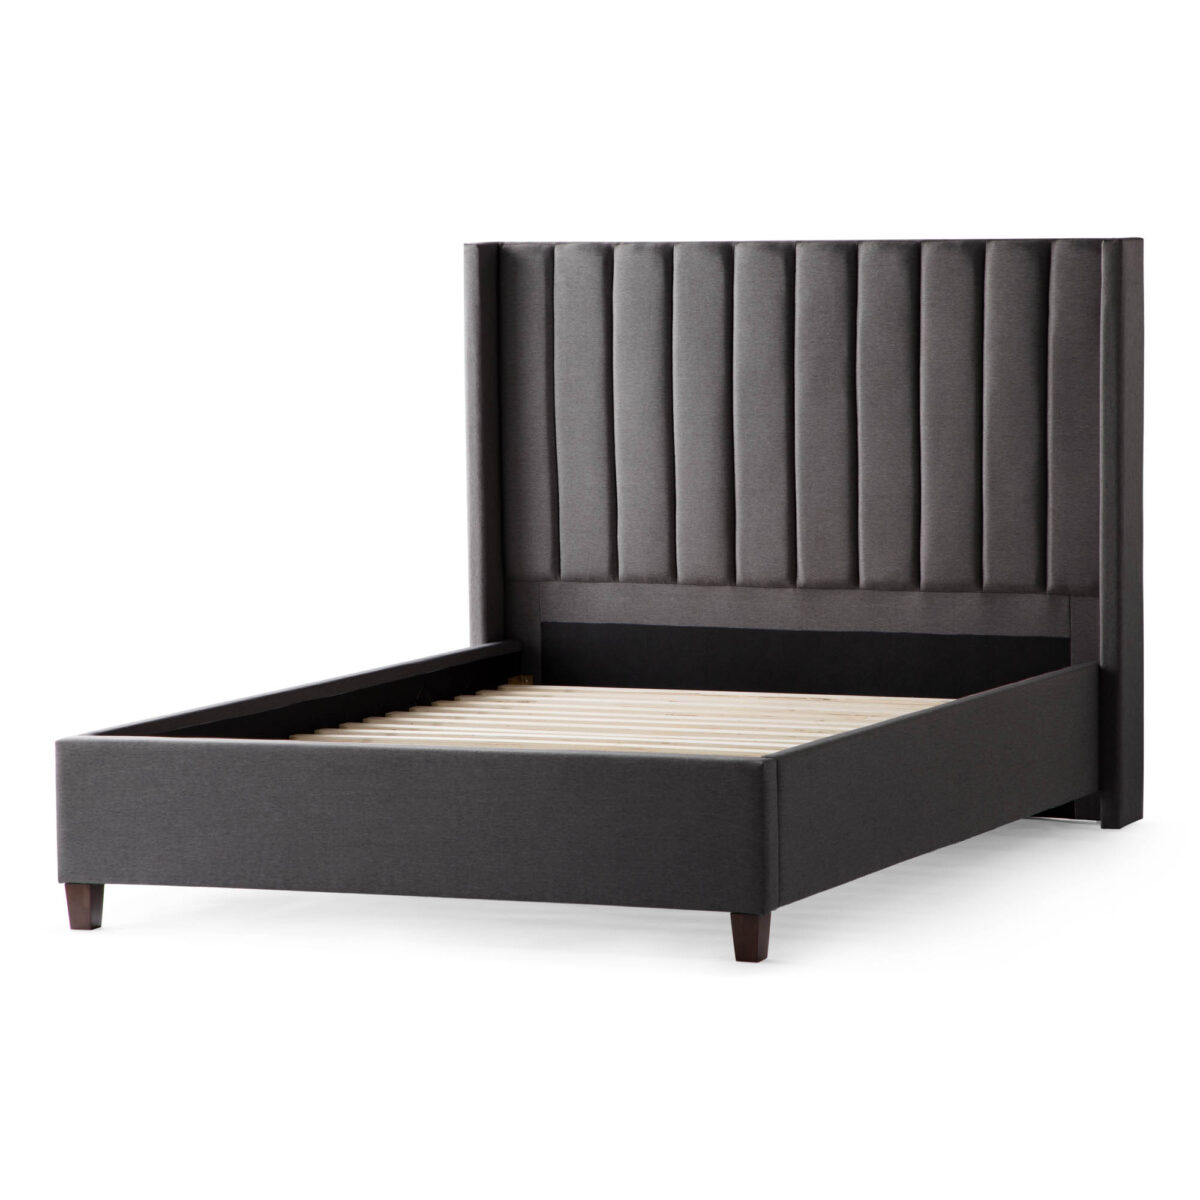 Malouf Blackwell Bed